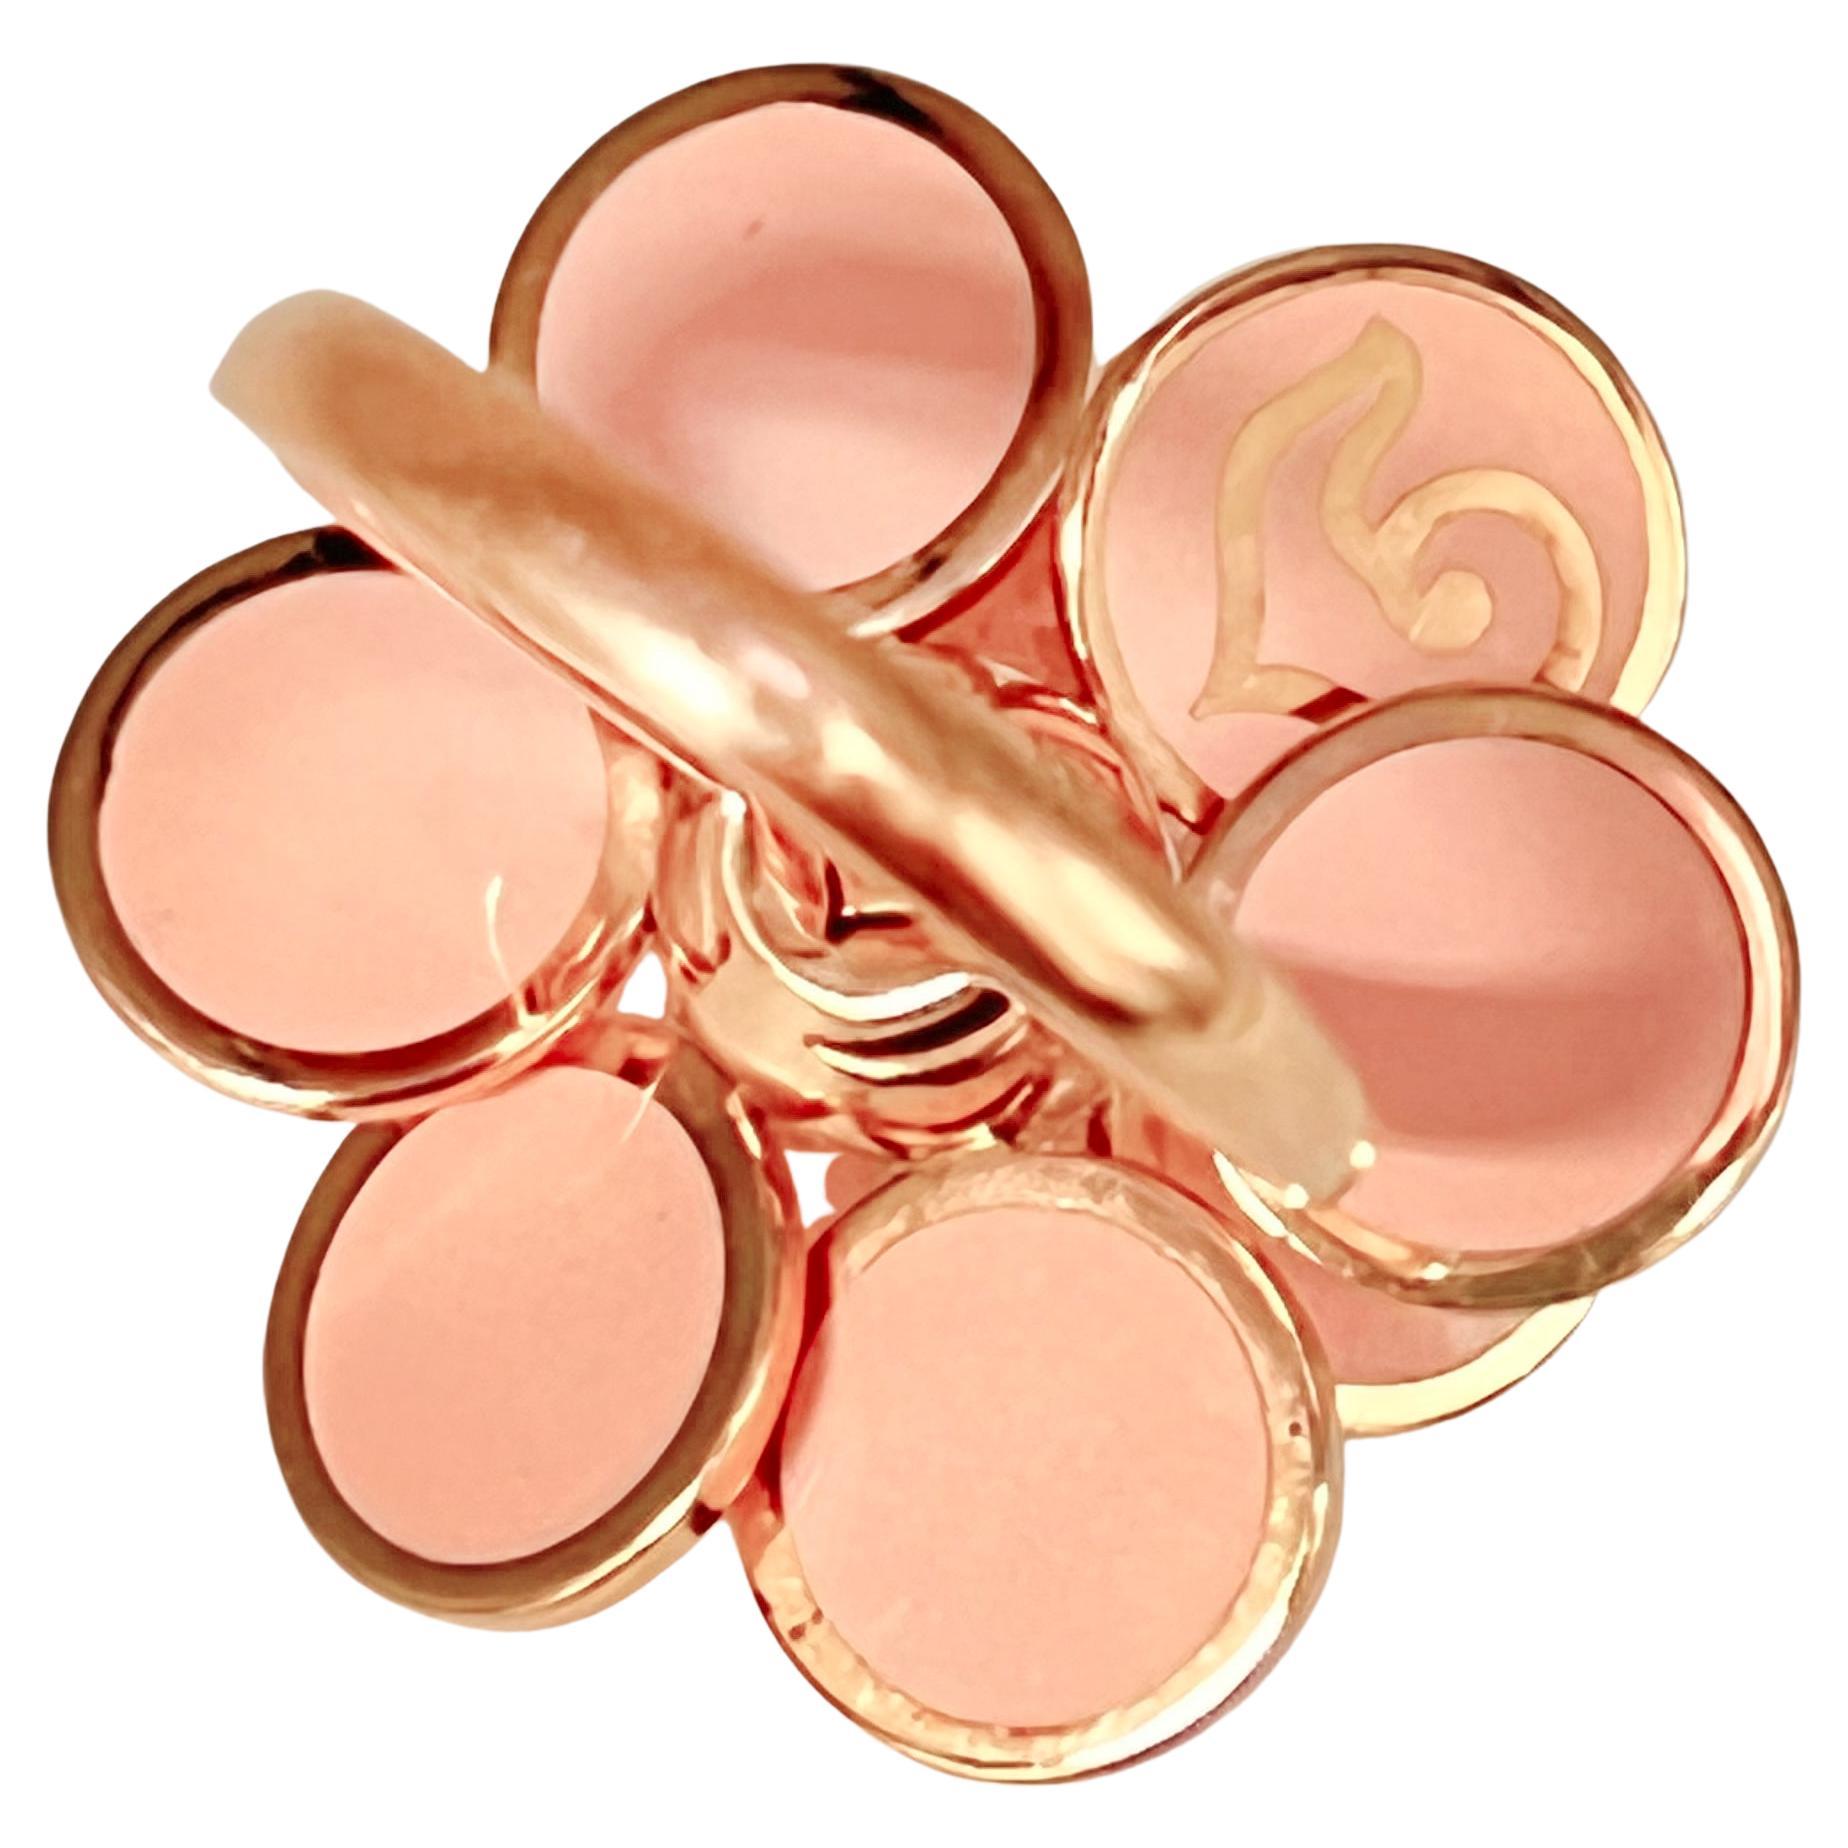 Cascade paillettes ring in 18k rose gold and pink enamel by Chantecler.  Beautiful floral petal top measuring 1.25